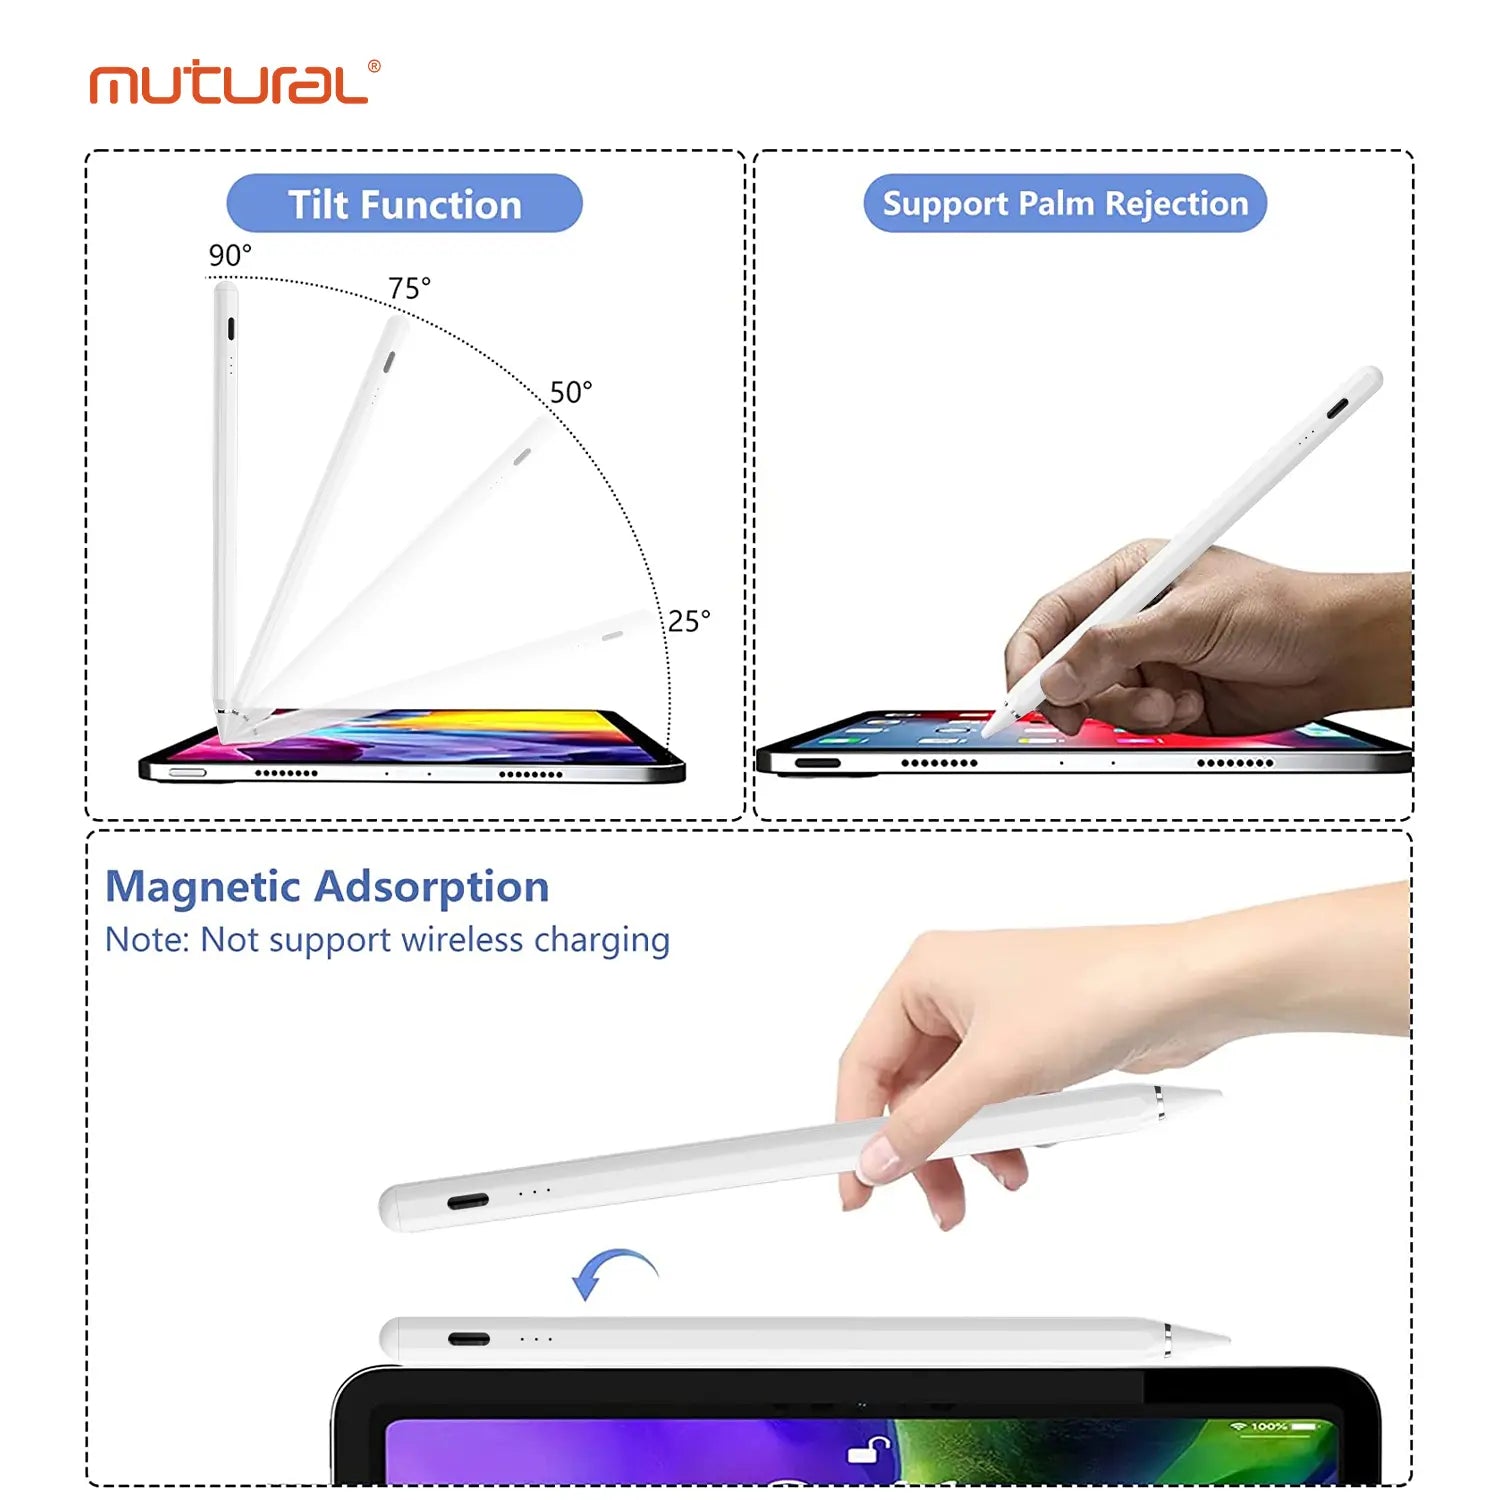 Mutural 950D Universal Stylus for iPad and Andorid Tablets, White